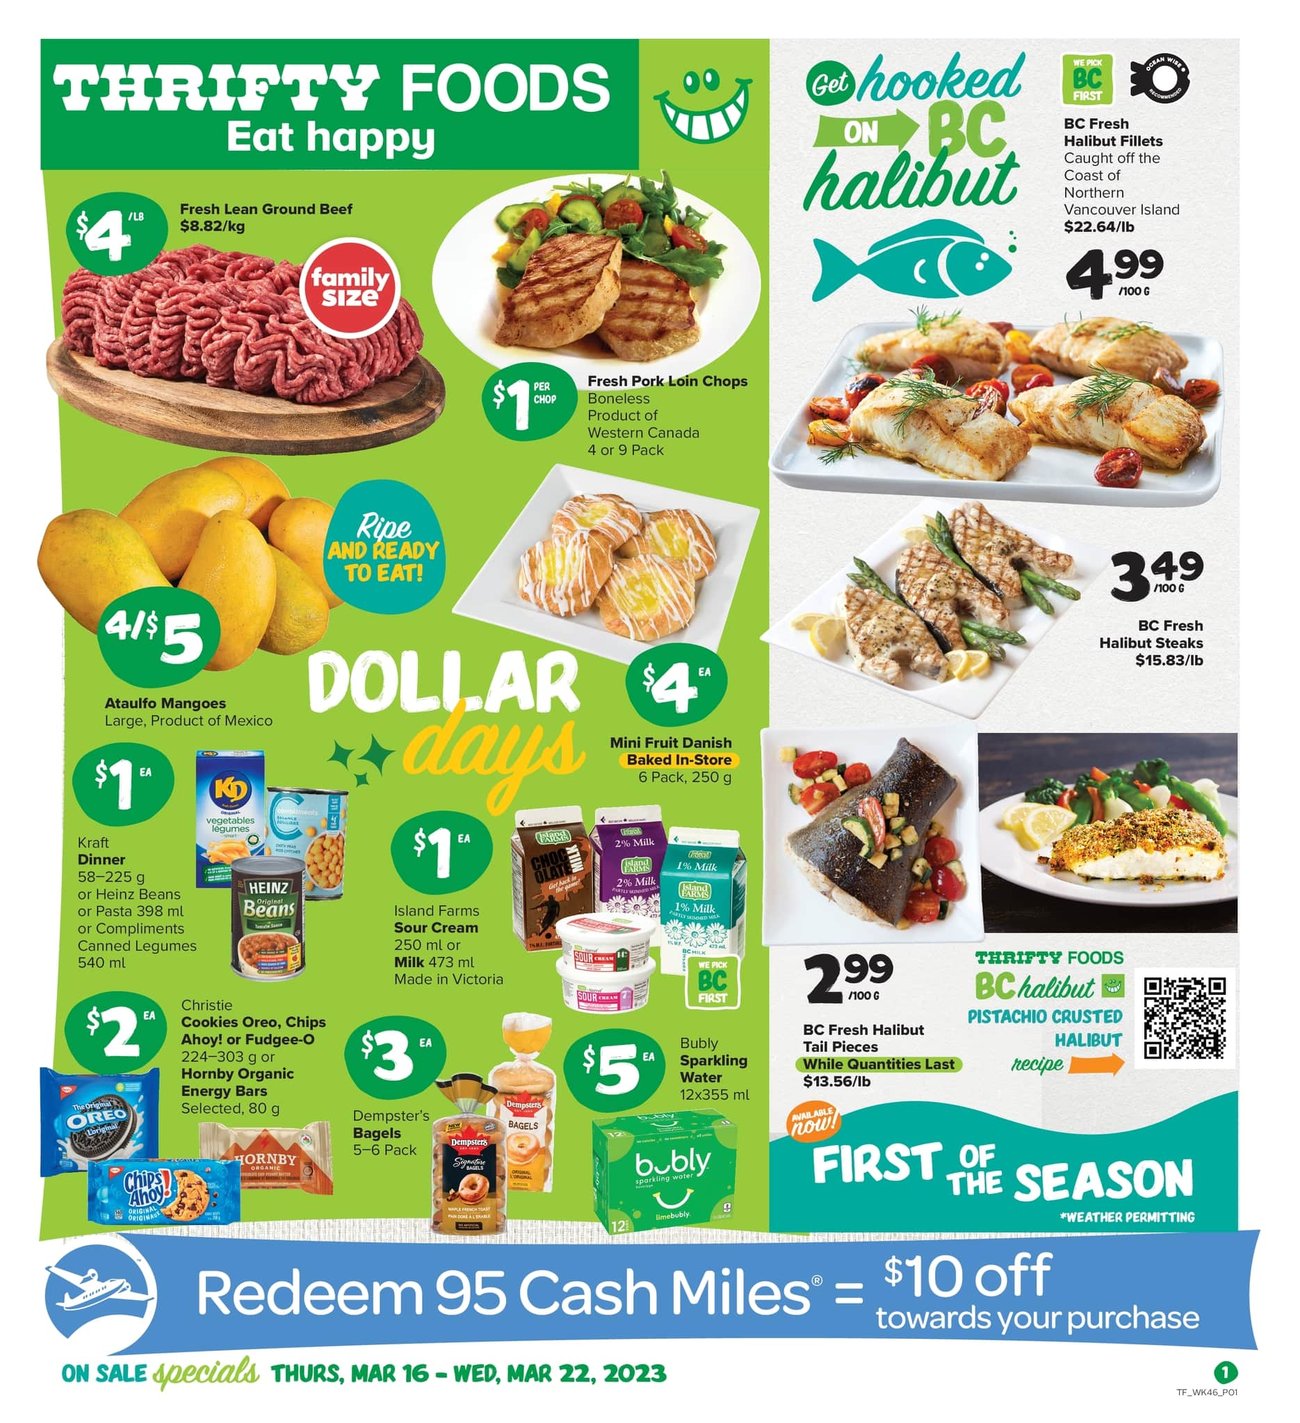 Thrifty Foods - Weekly Flyer Specials - Page 1